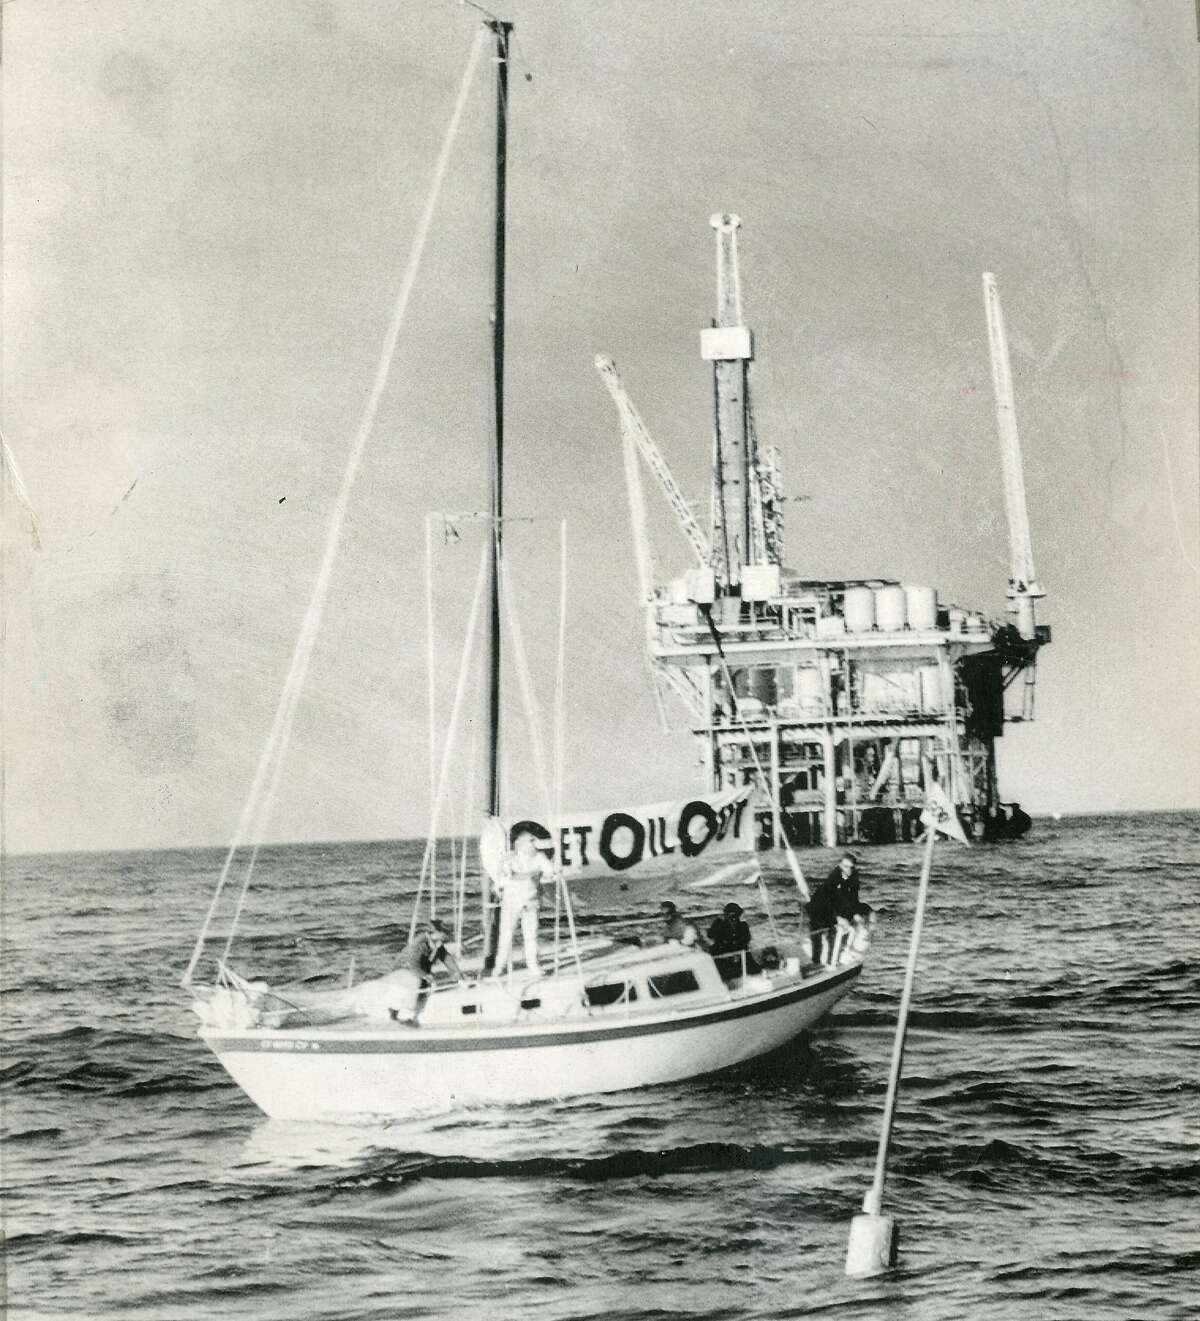 A buoy was set up in the vicinity of Union Oil Co. PLatform 4, to mark the spot where the oil spill occurred a year earlier. Ship was chartered by GOO (Get Oil Out) January 28, 1970 Associated Press photo Ran 02/15/1970, This World